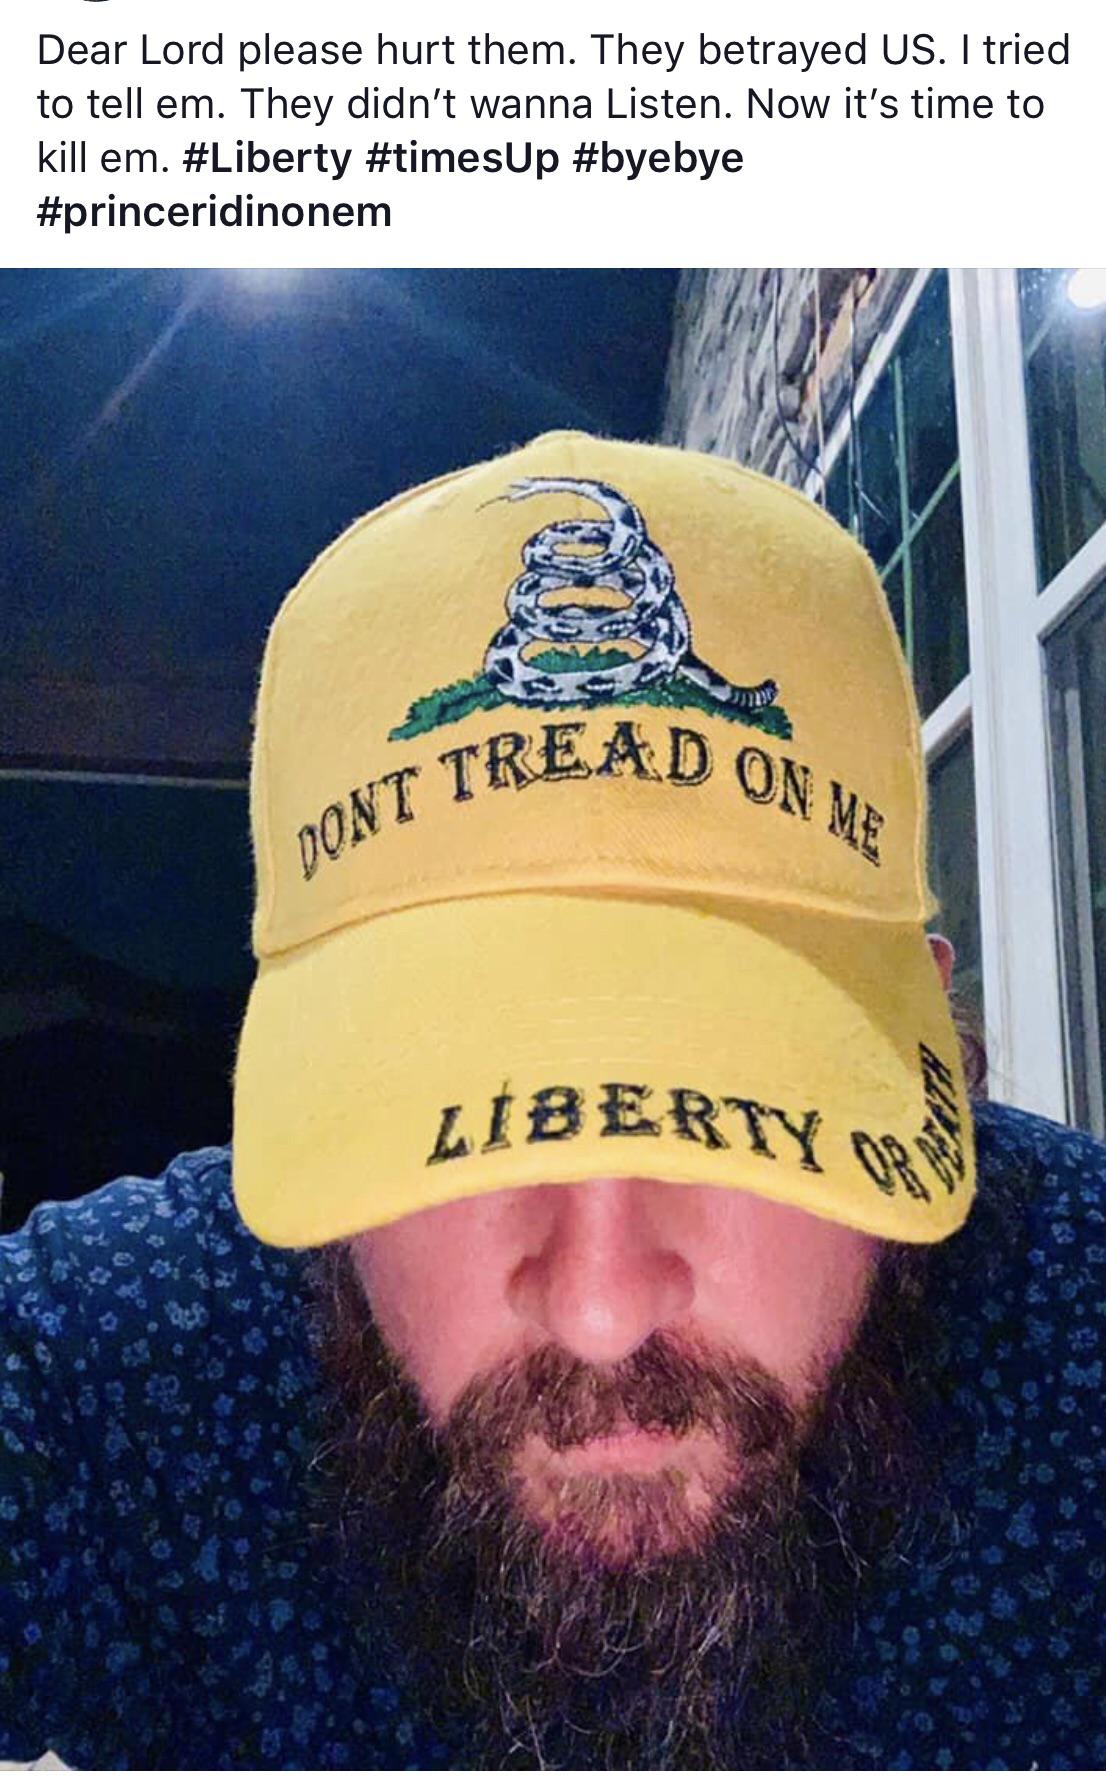 beard - Dear Lord please hurt them. They betrayed Us. I tried to tell em. They didn't wanna Listen. Now it's time to kill em. Ad On Me Font Tread Liberty